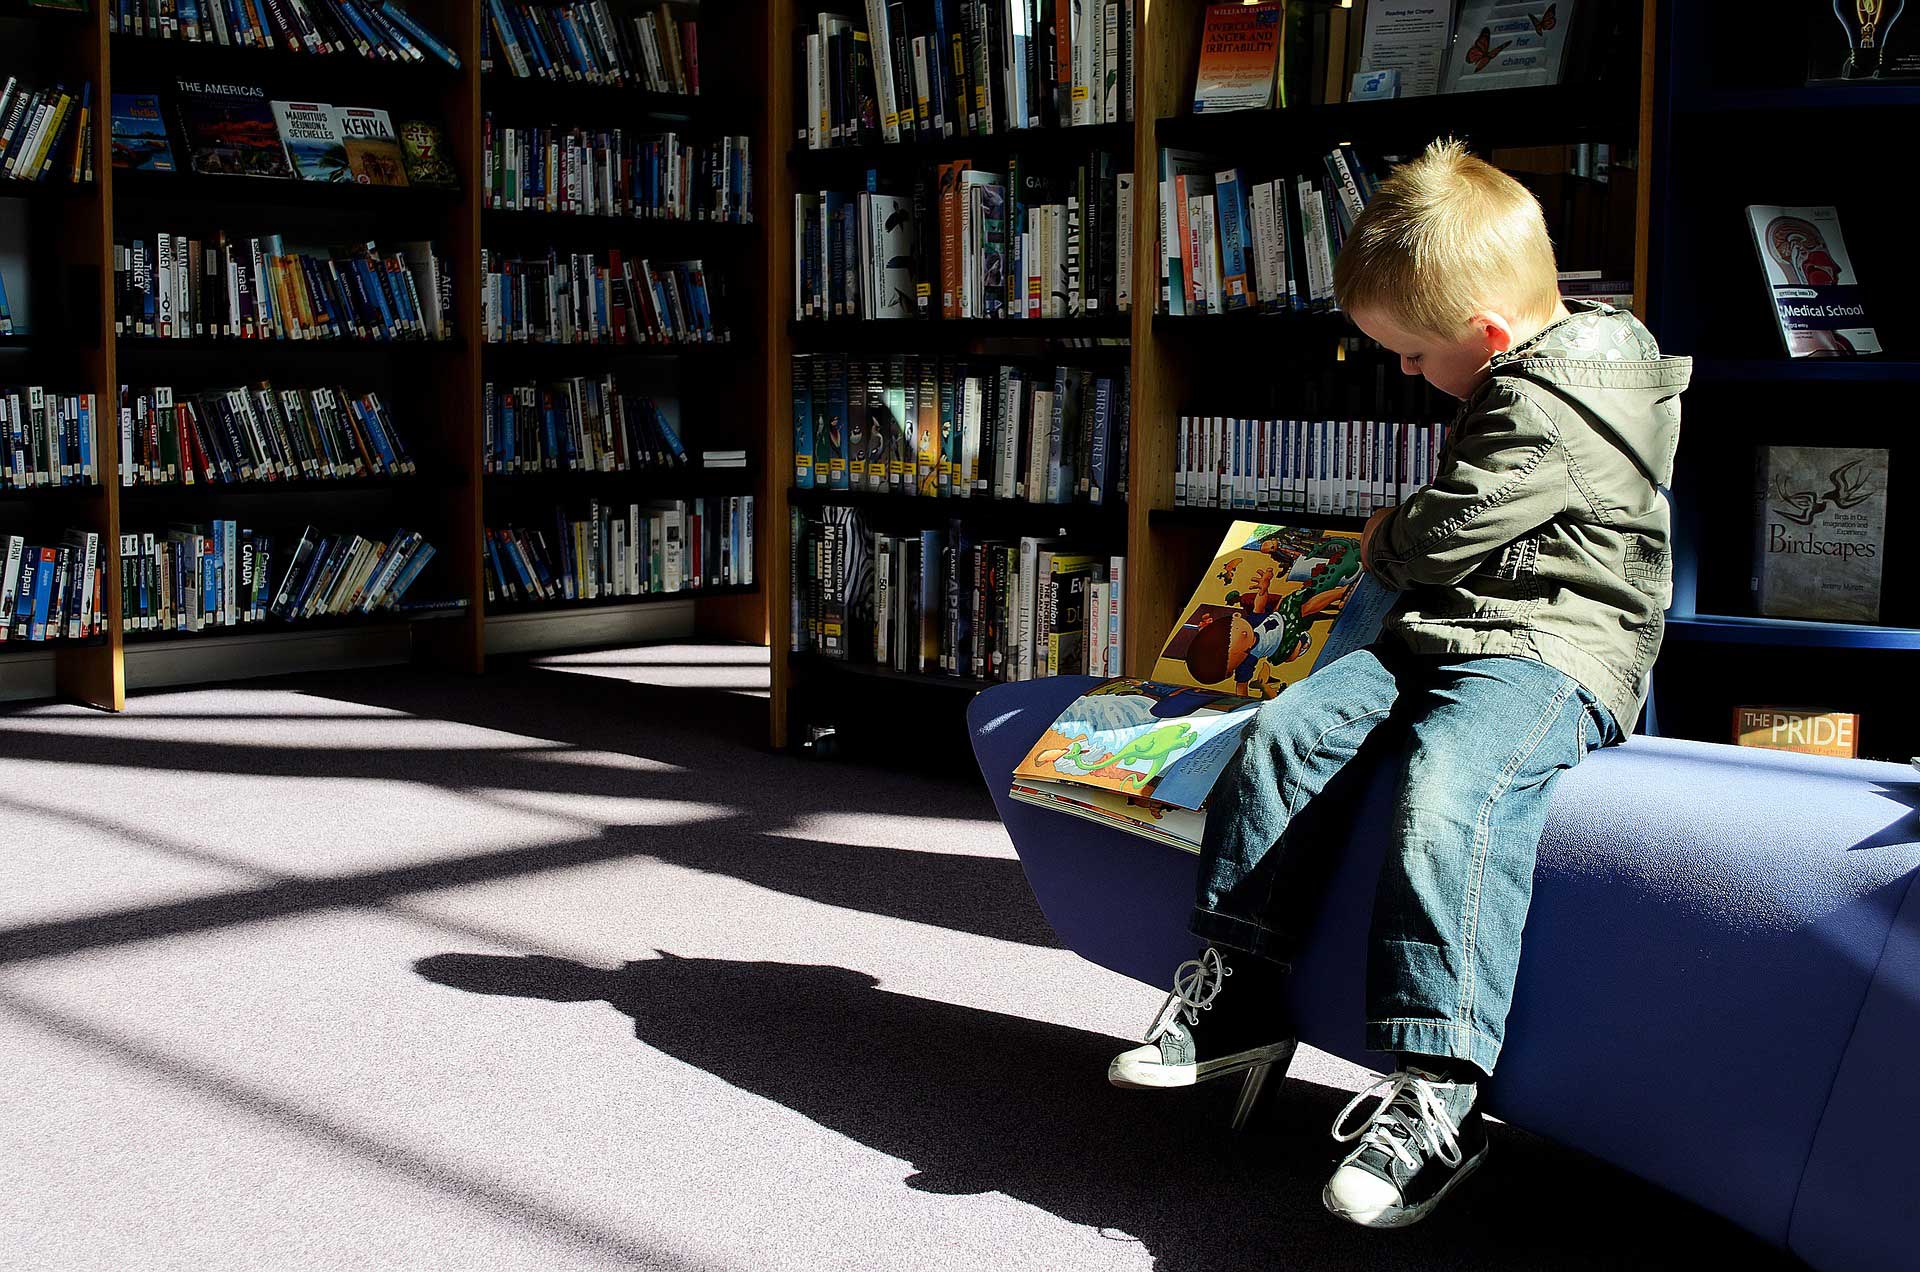 A child reading in a library.